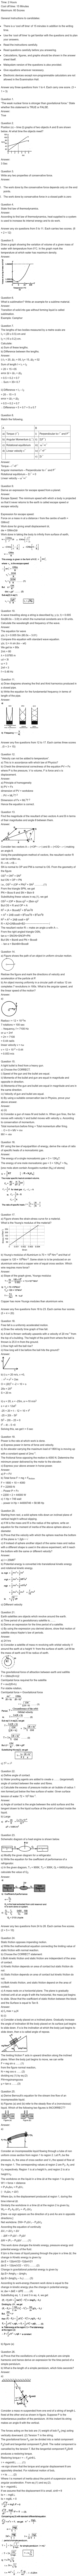 Plus One Physics Previous Year Question Papers and Answers PDf